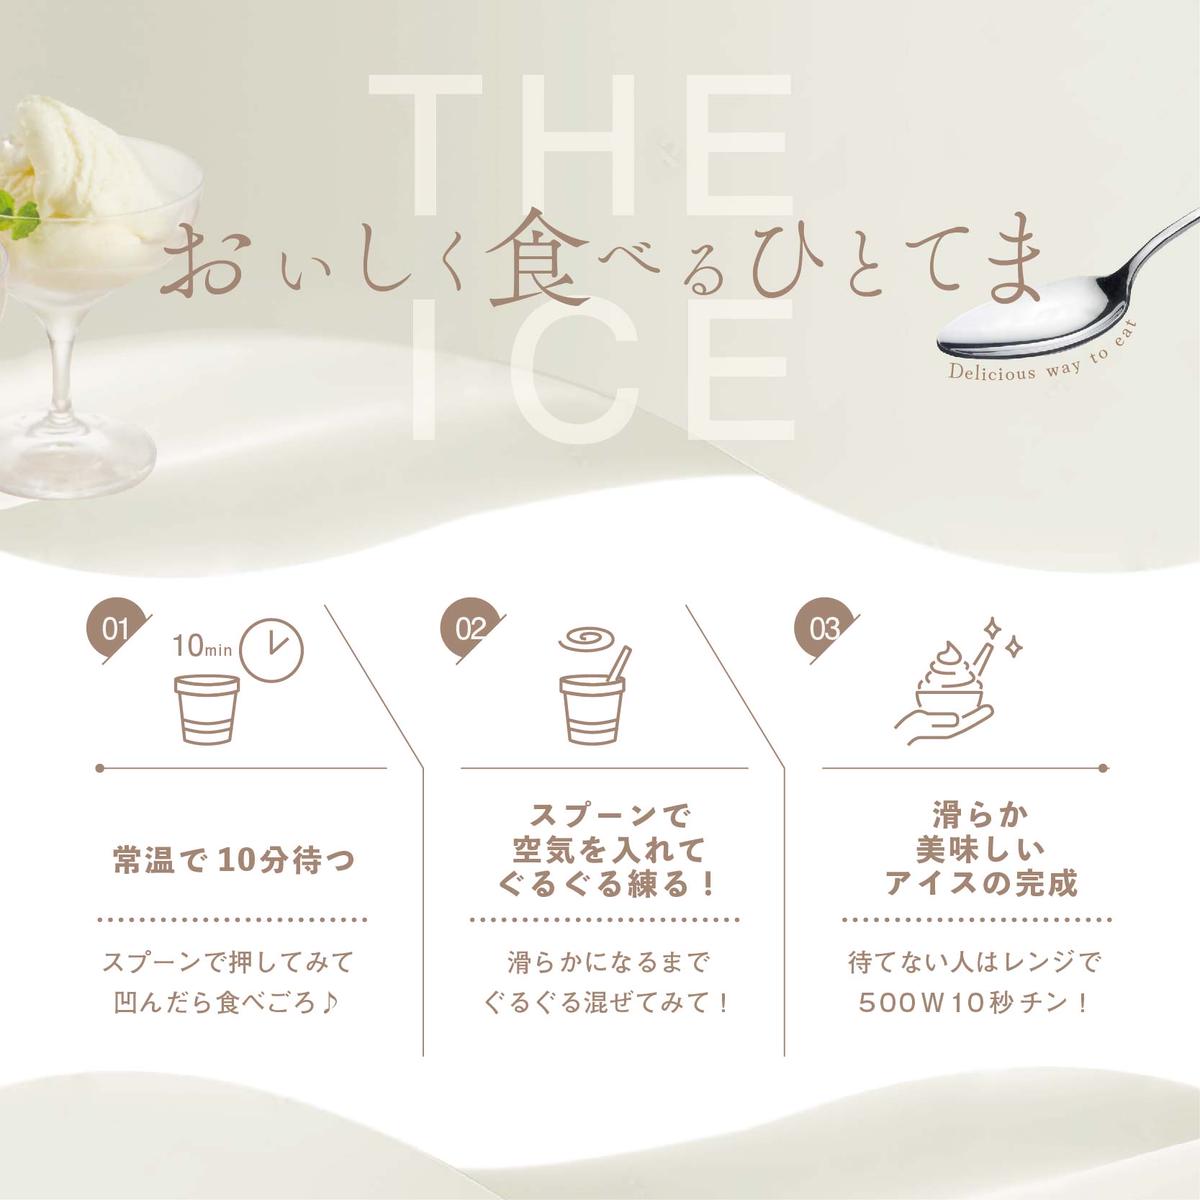 【THEICE】3種詰合せ12個セット【高島屋選定品】